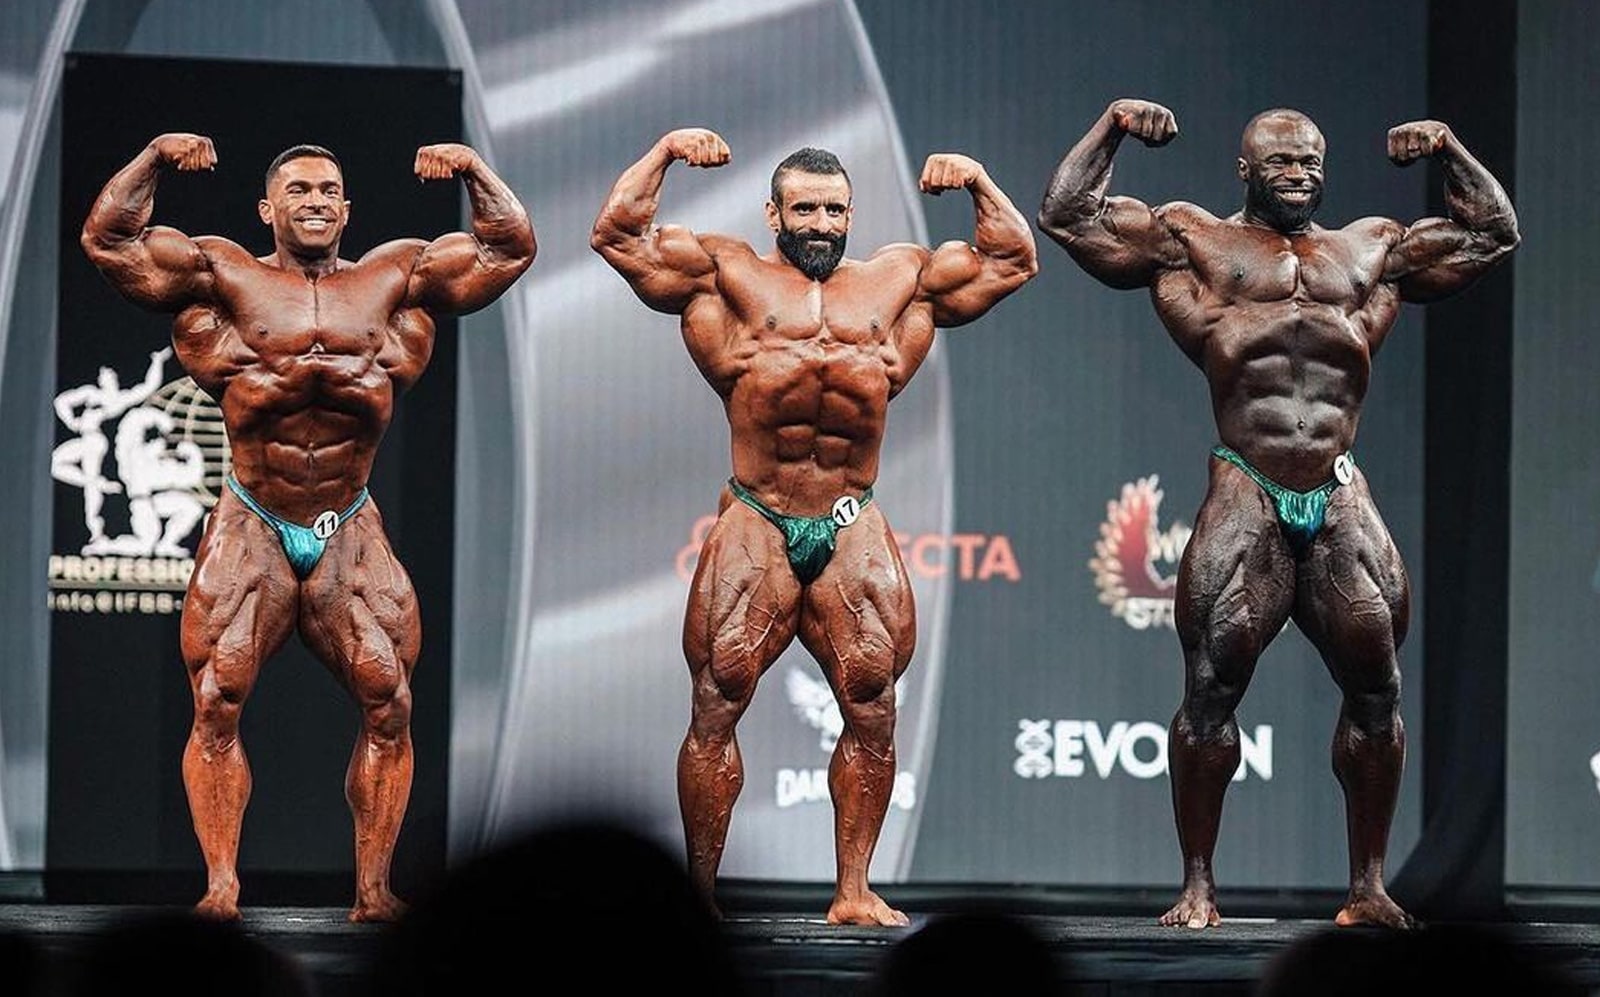 Jay Cutler Advsies 2023 Olympia Champ Derek Lunsford 'Pace Yourself